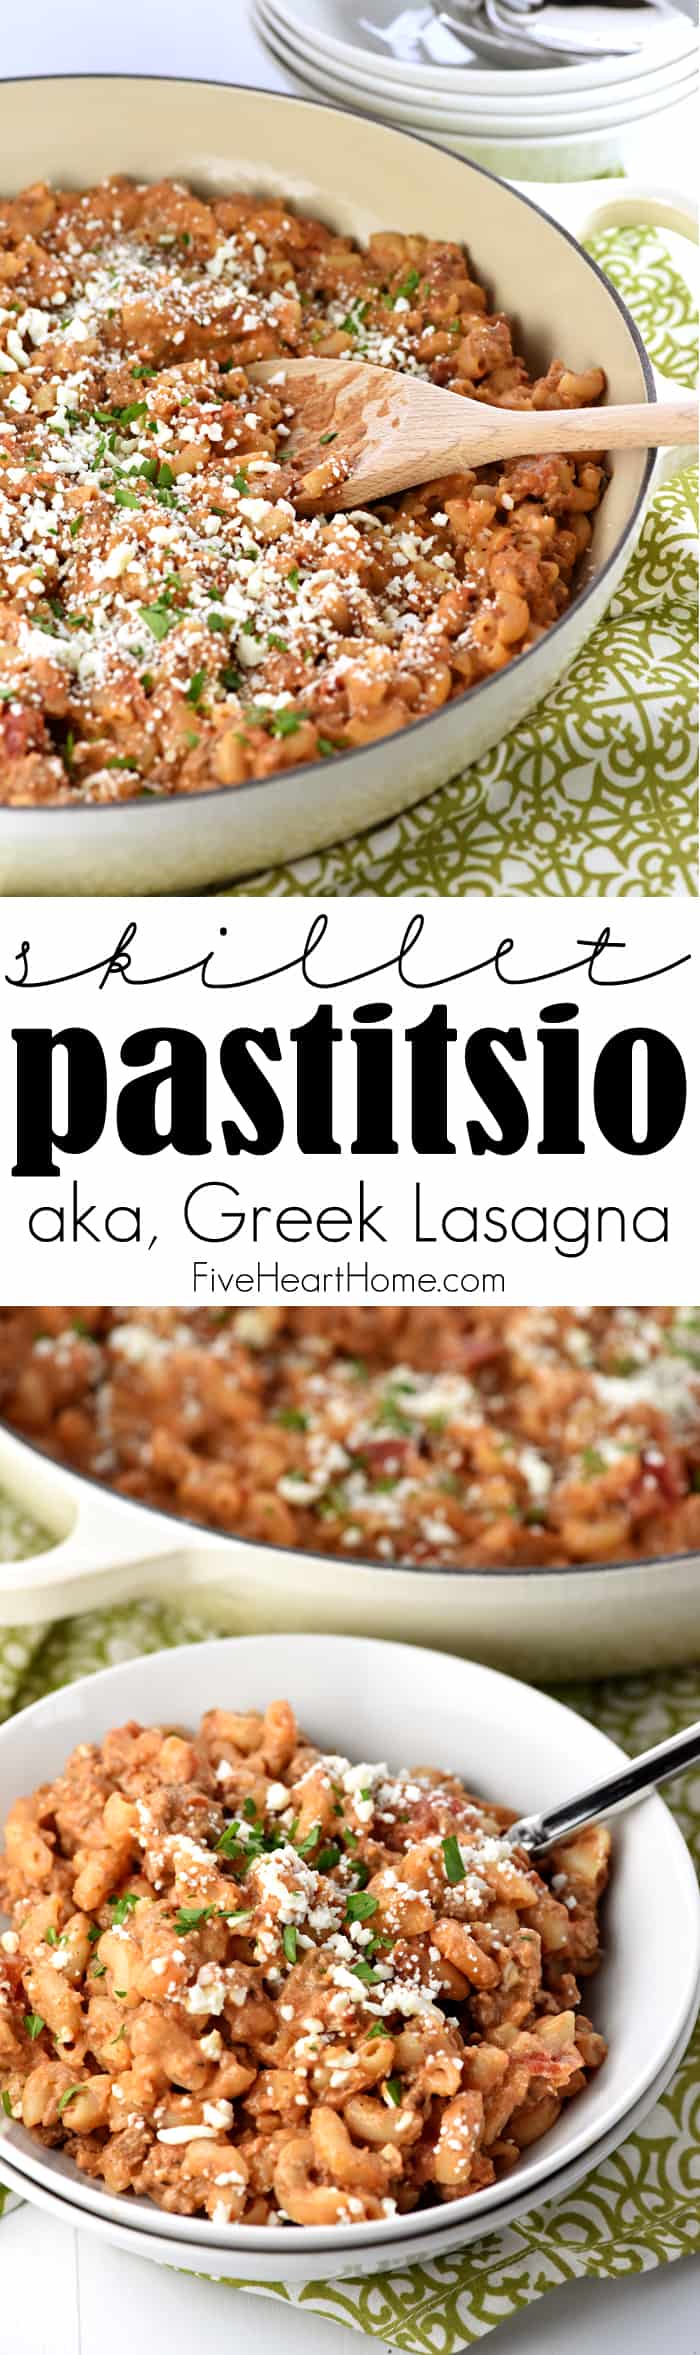 Easy Skillet Pastitsio Recipe ~ a delicious, 30-minute, one-pan dinner recipe of creamy, flavorful Greek lasagna -- loaded with ground beef, tomatoes, pasta, and Greek yogurt! | FiveHeartHome.com via @fivehearthome